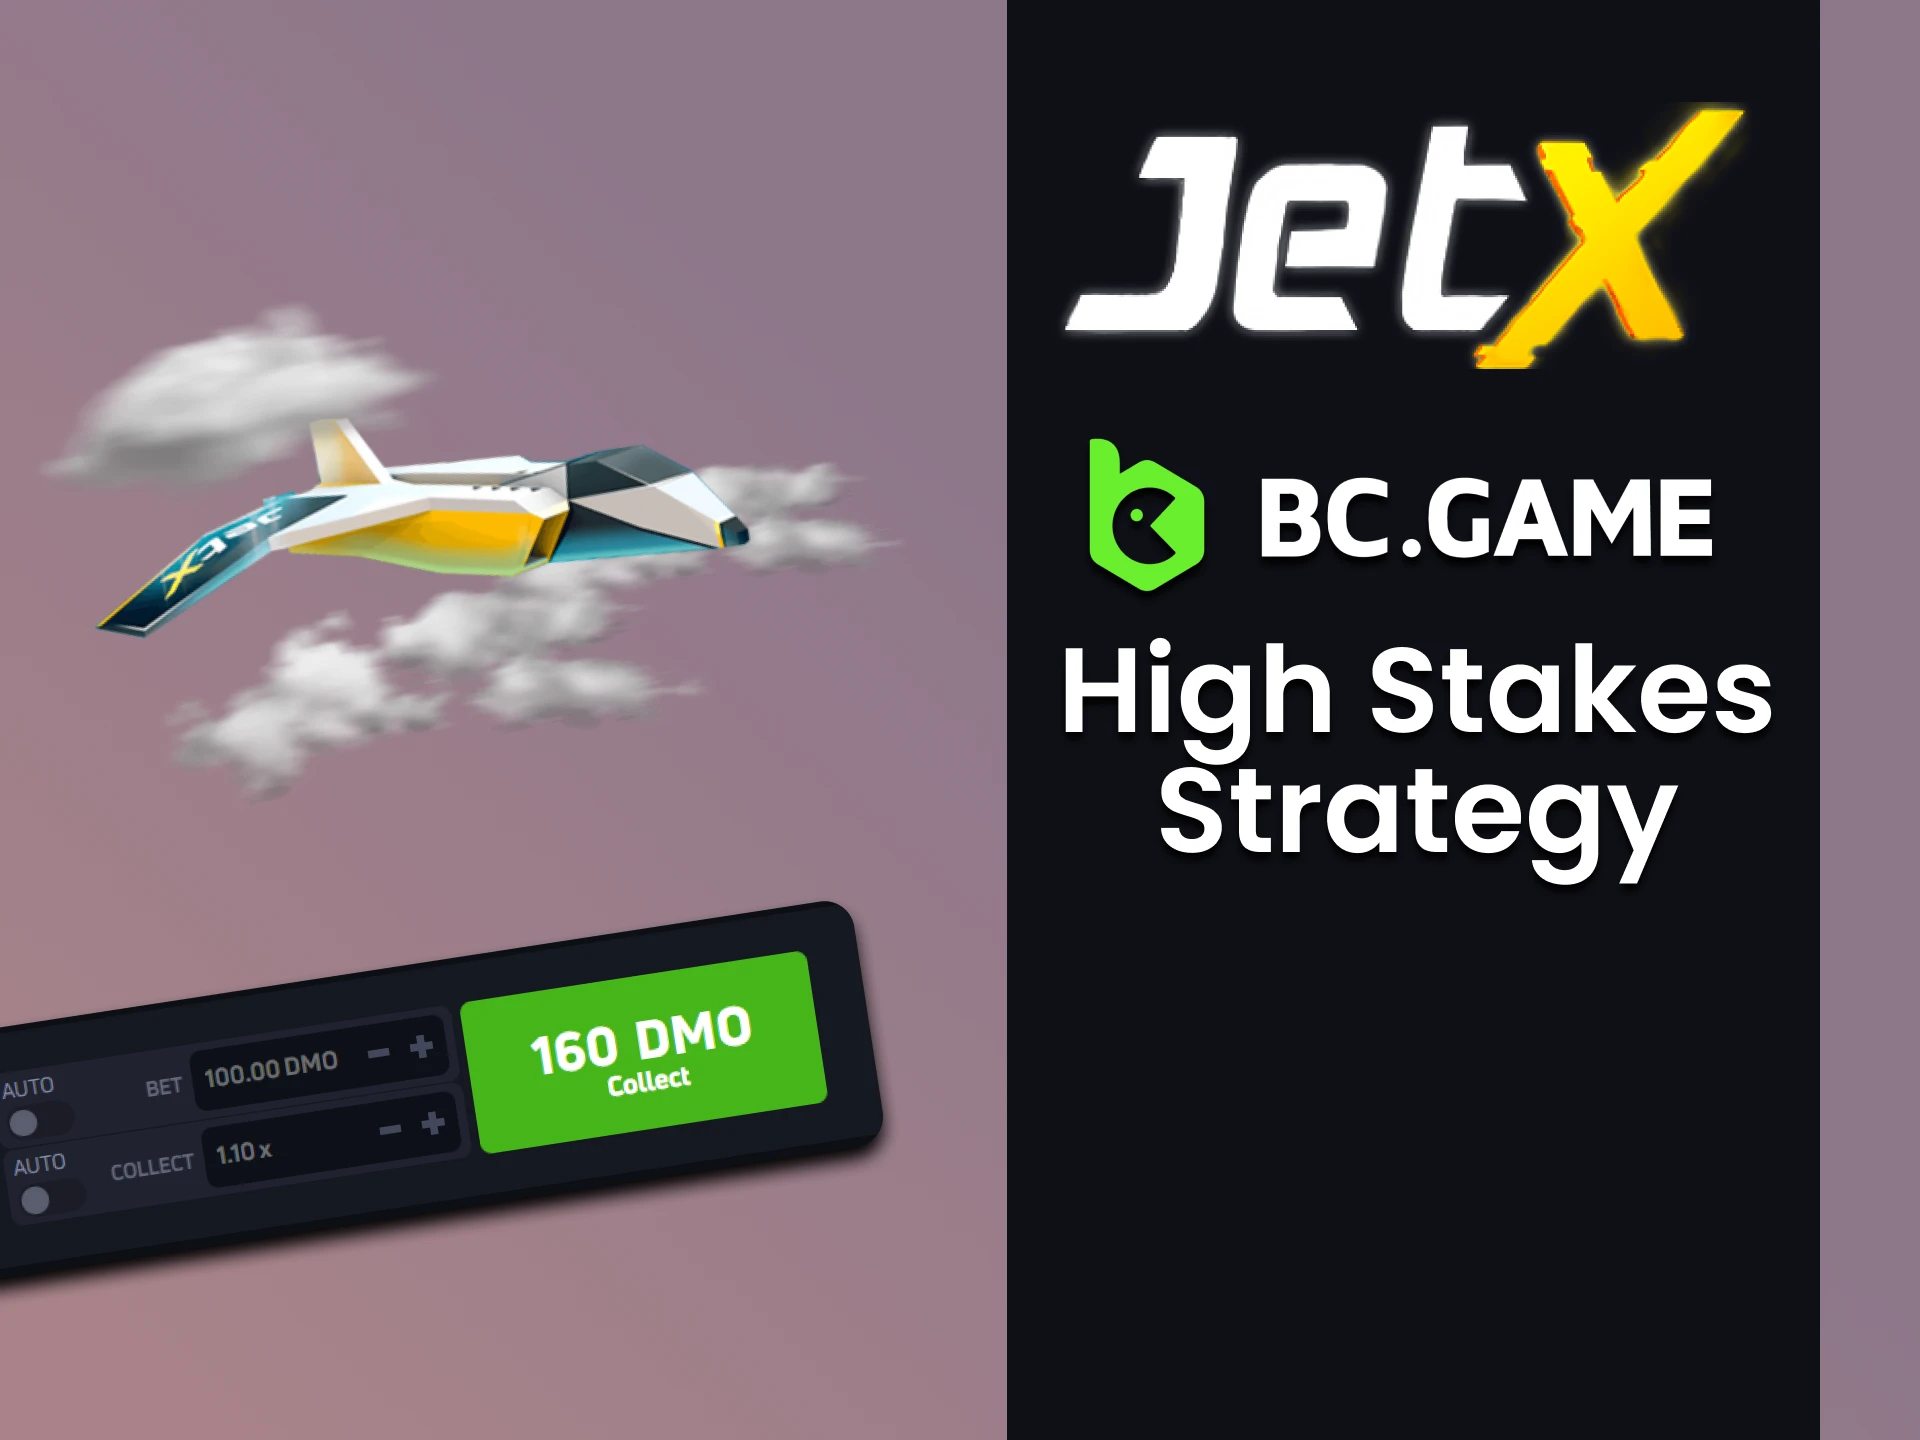 You can choose a high-stakes strategy in BC Game's JetX game.